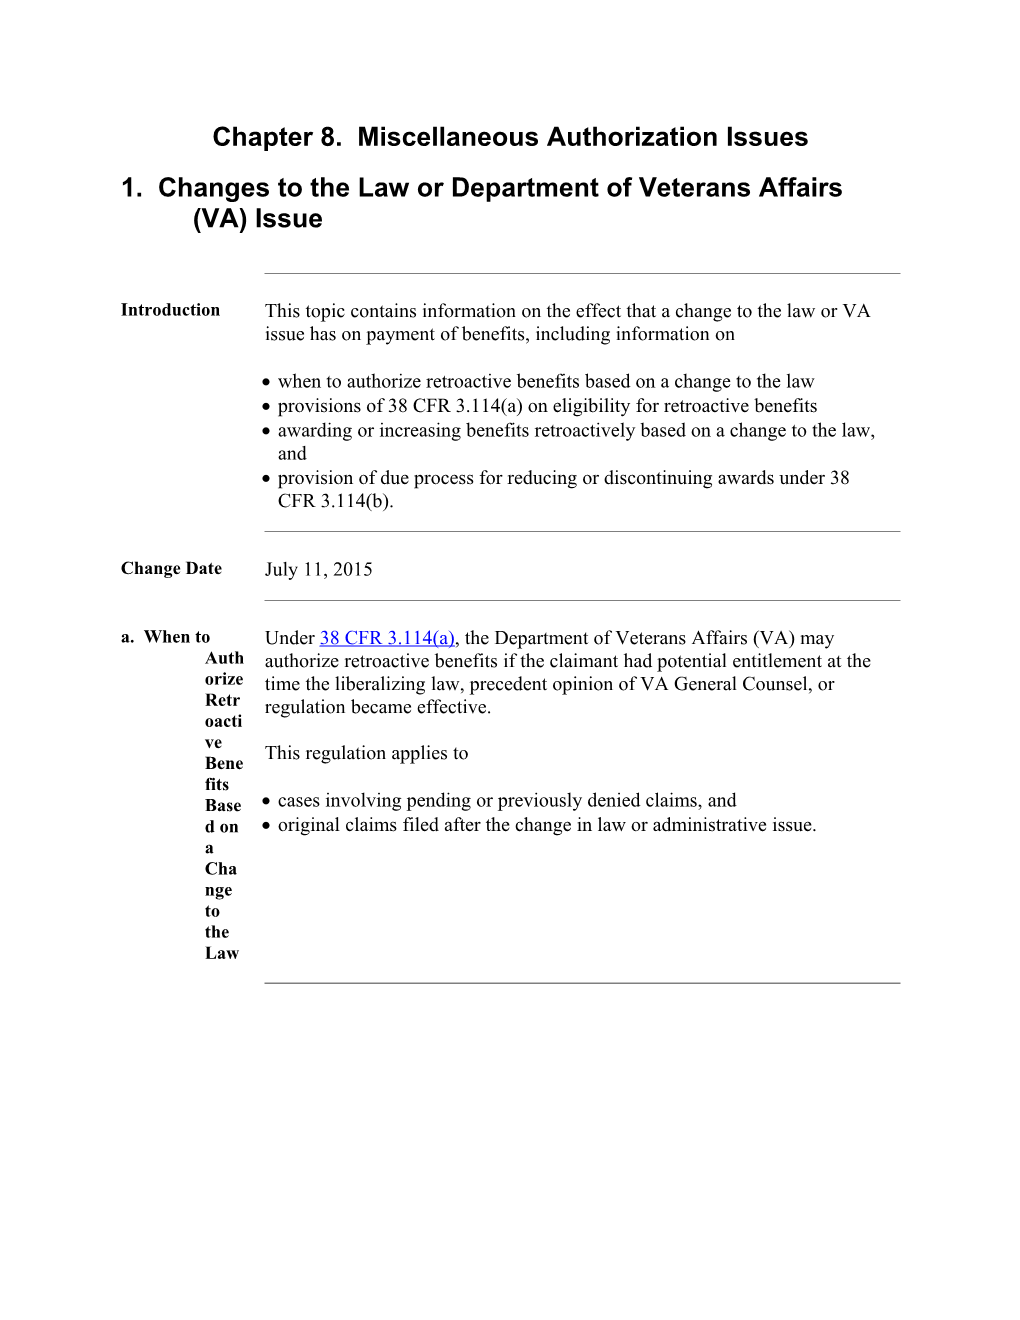 Miscellaneous Authorization Issues, (U.S. Department of Veterans Affairs)